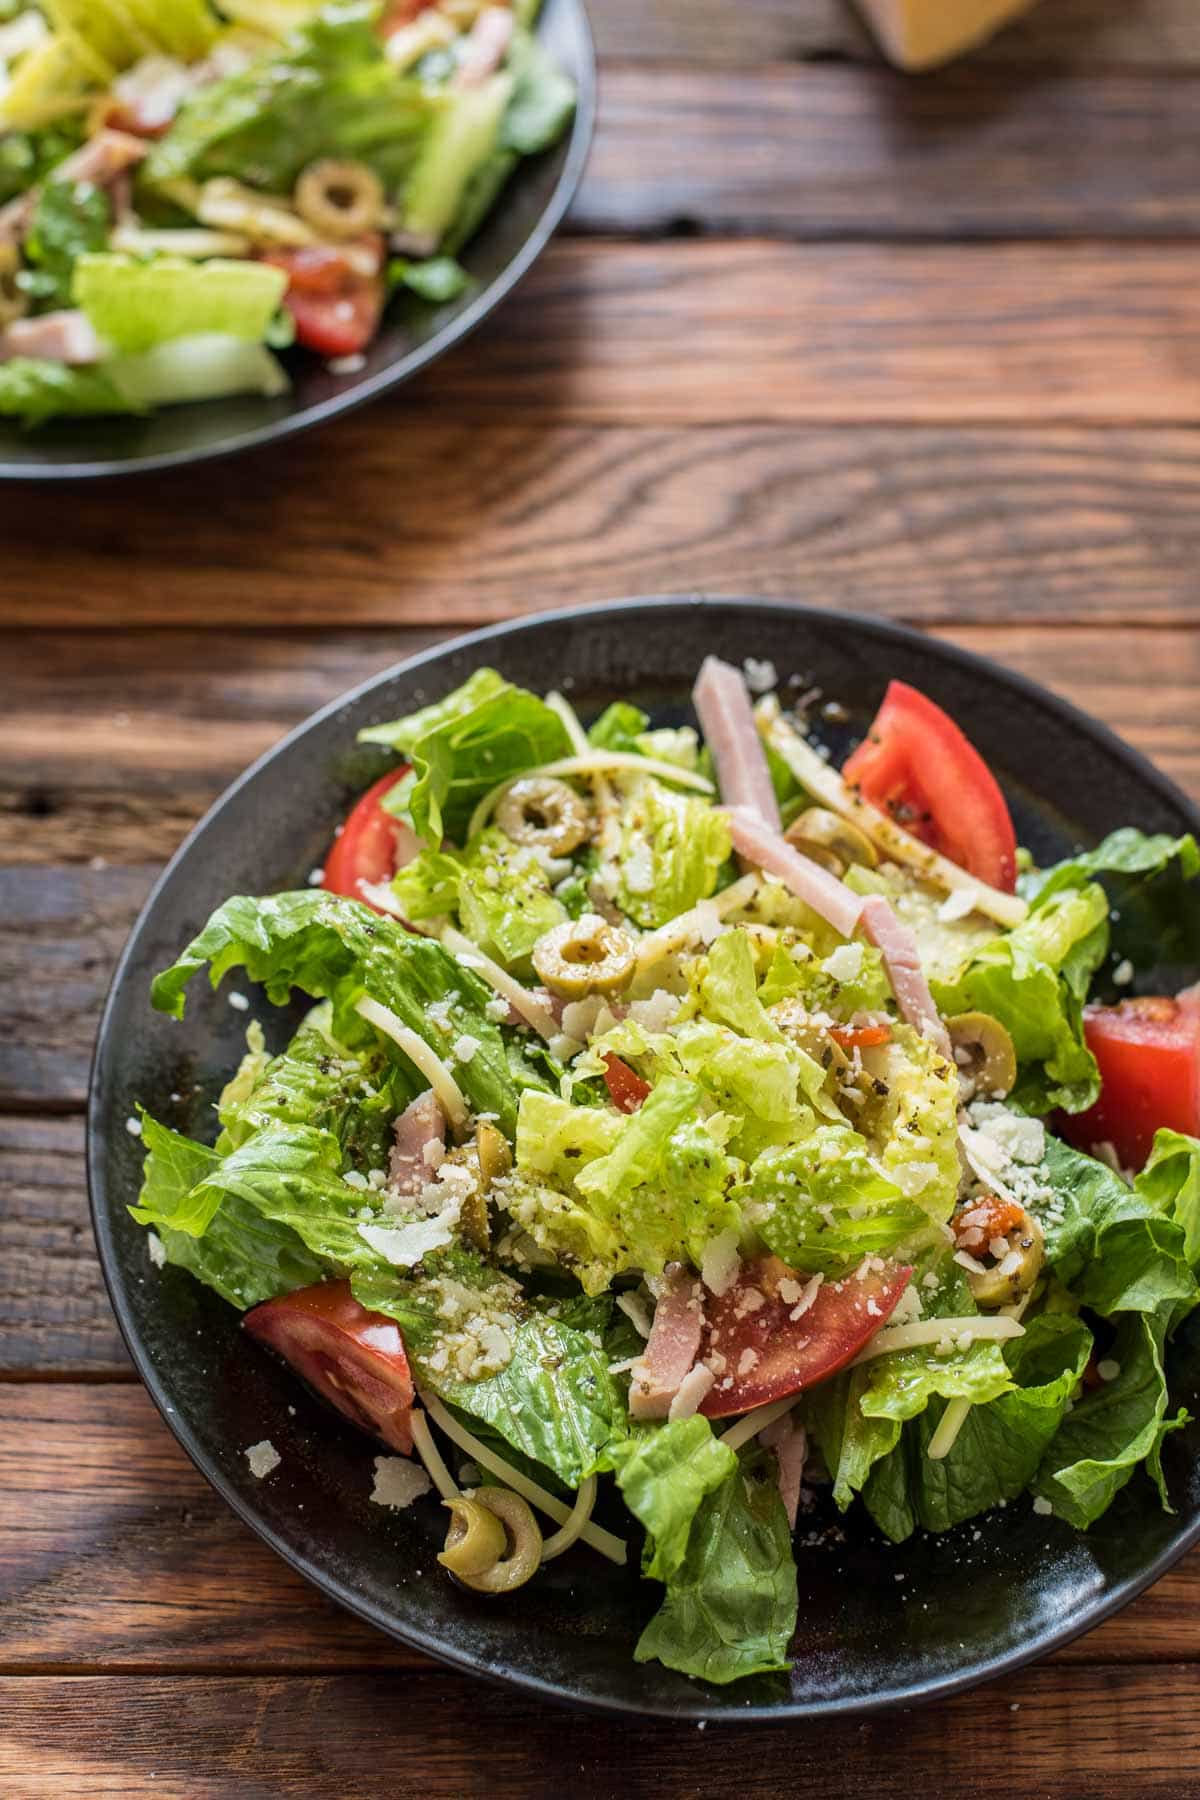 Made famous by Columbia restaurant, this 1905 Salad with ham, swiss, and garlic dressing is worthy of all its fame!